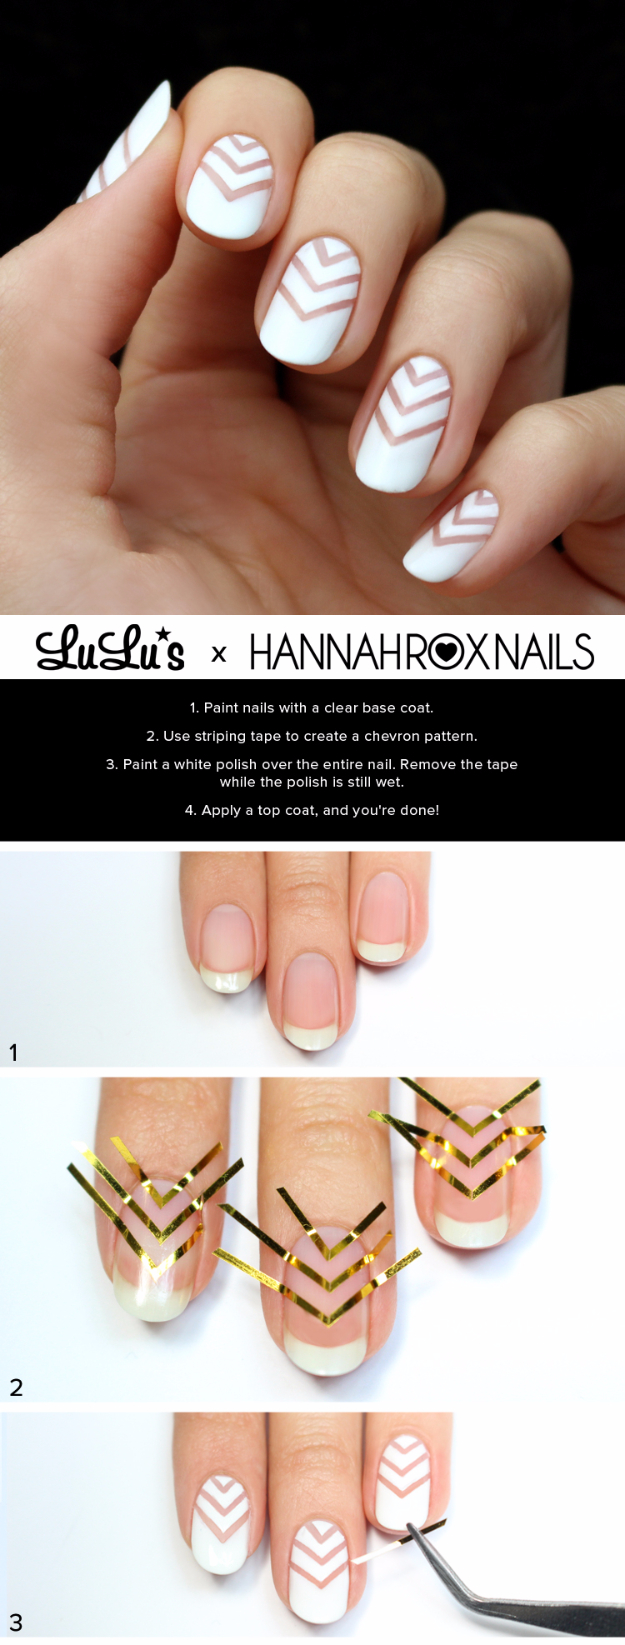 Awesome Nail Art Patterns And Ideas - White Chevron Negative Space Tutorial - Step by Step DIY Nail Design Tutorials for Simple Art, Tribal Prints, Best Black and White Manicures. Easy and Fun Colors, Shapes and Designs for Your Nails 